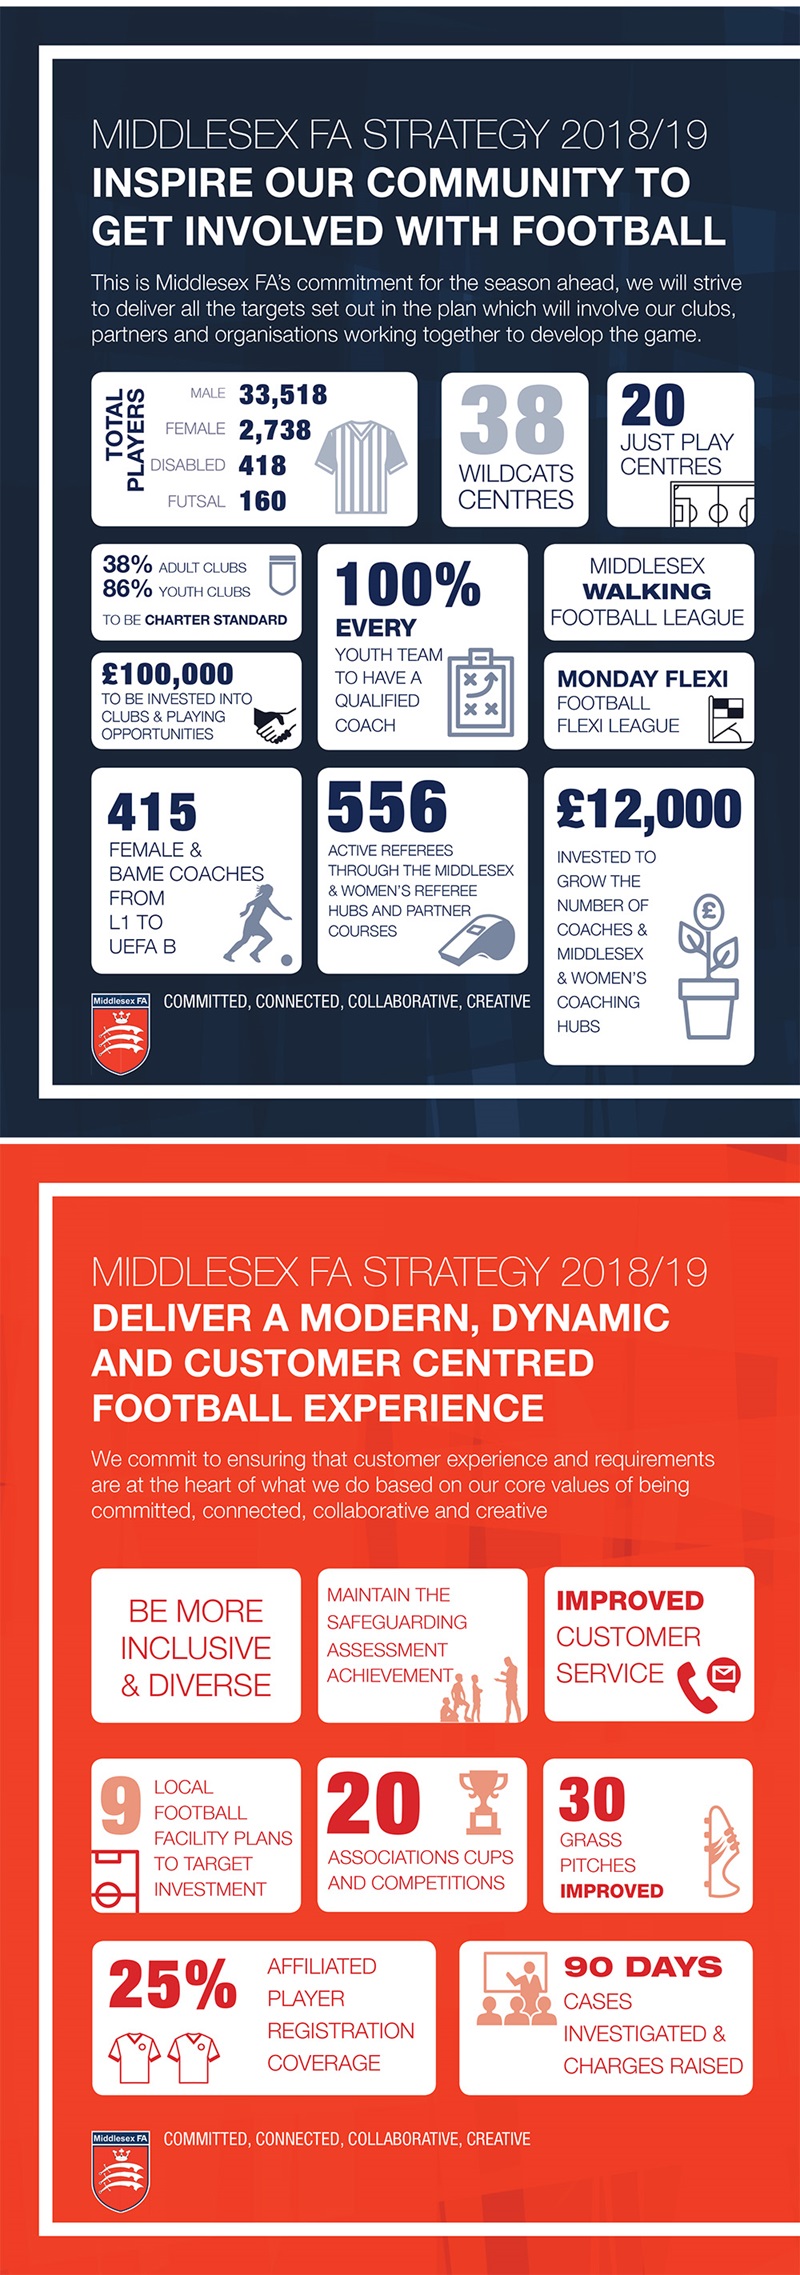 Middlesex FA Strategy